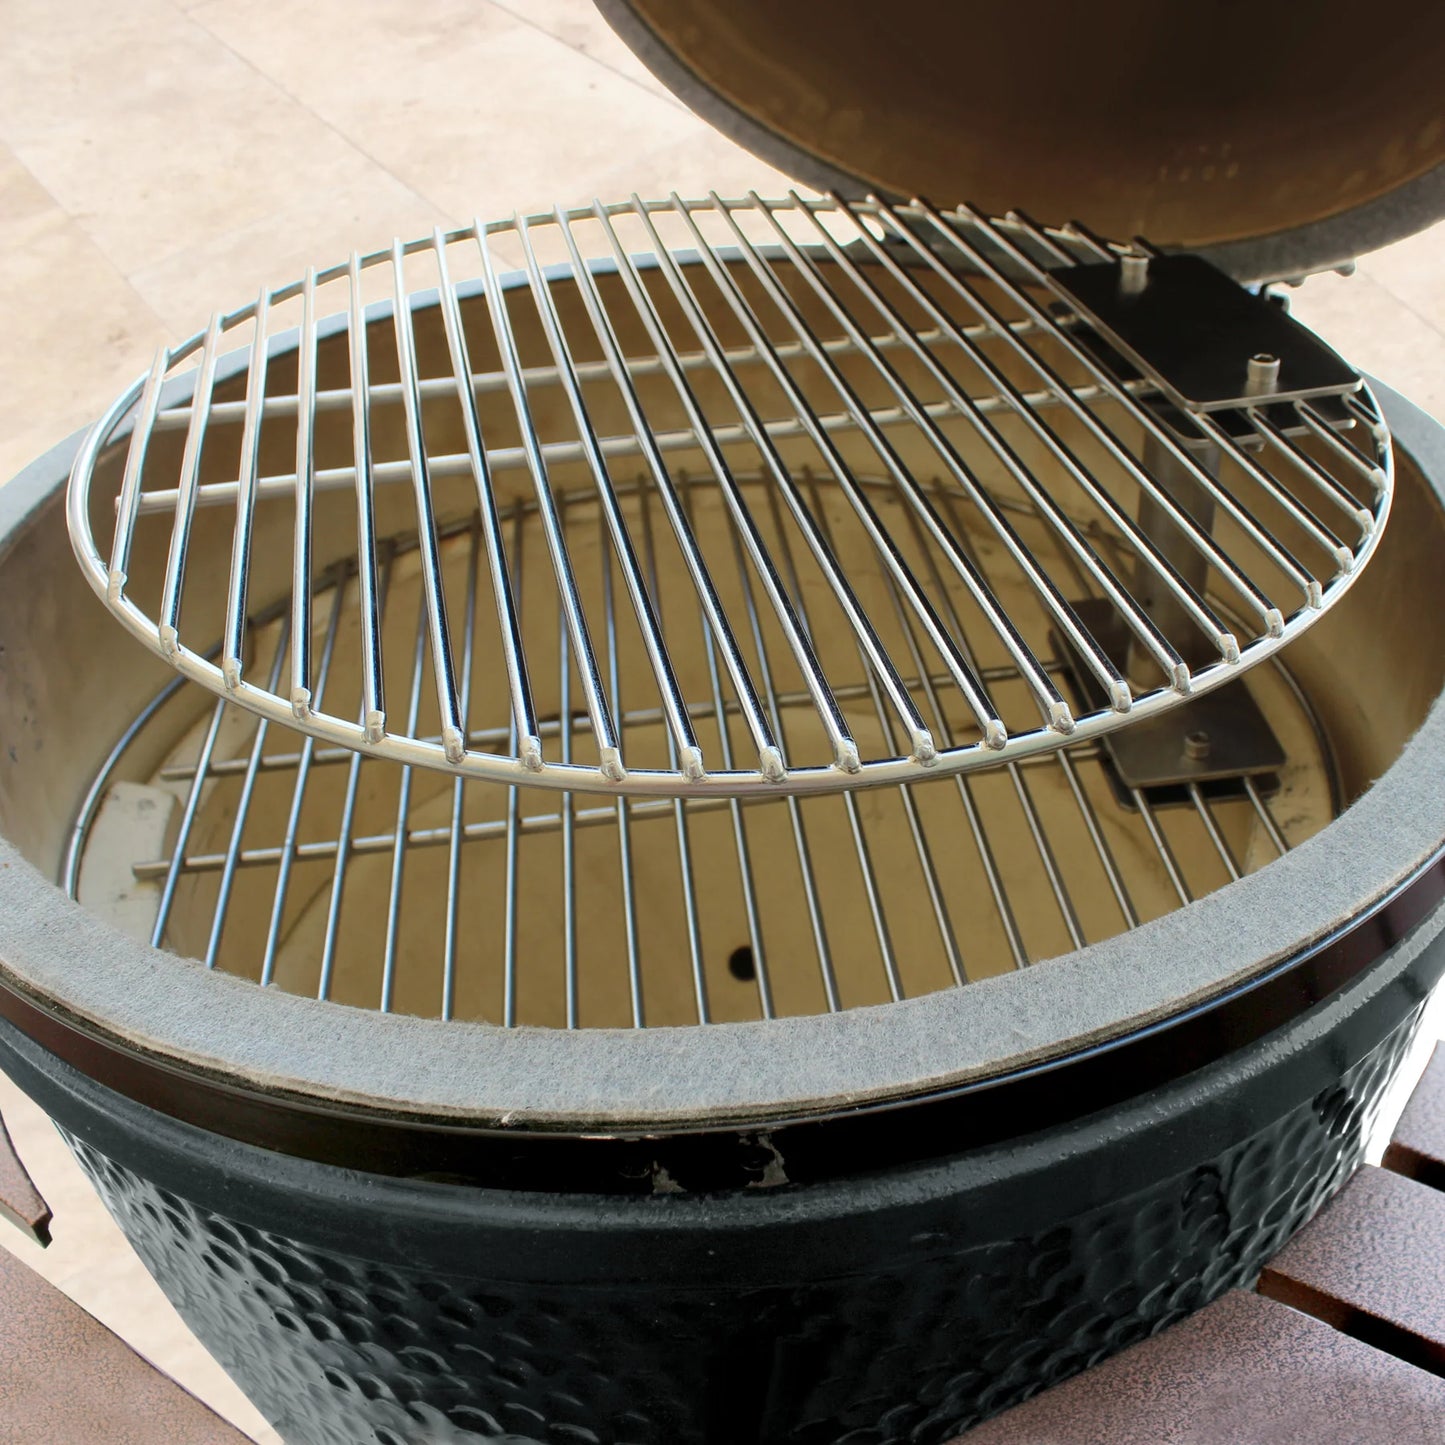 Smokeware Extra Large Swivel Grate Stacker Combo 18" Inch Grid with 5" Inch Stacker - Big / XL Kamado